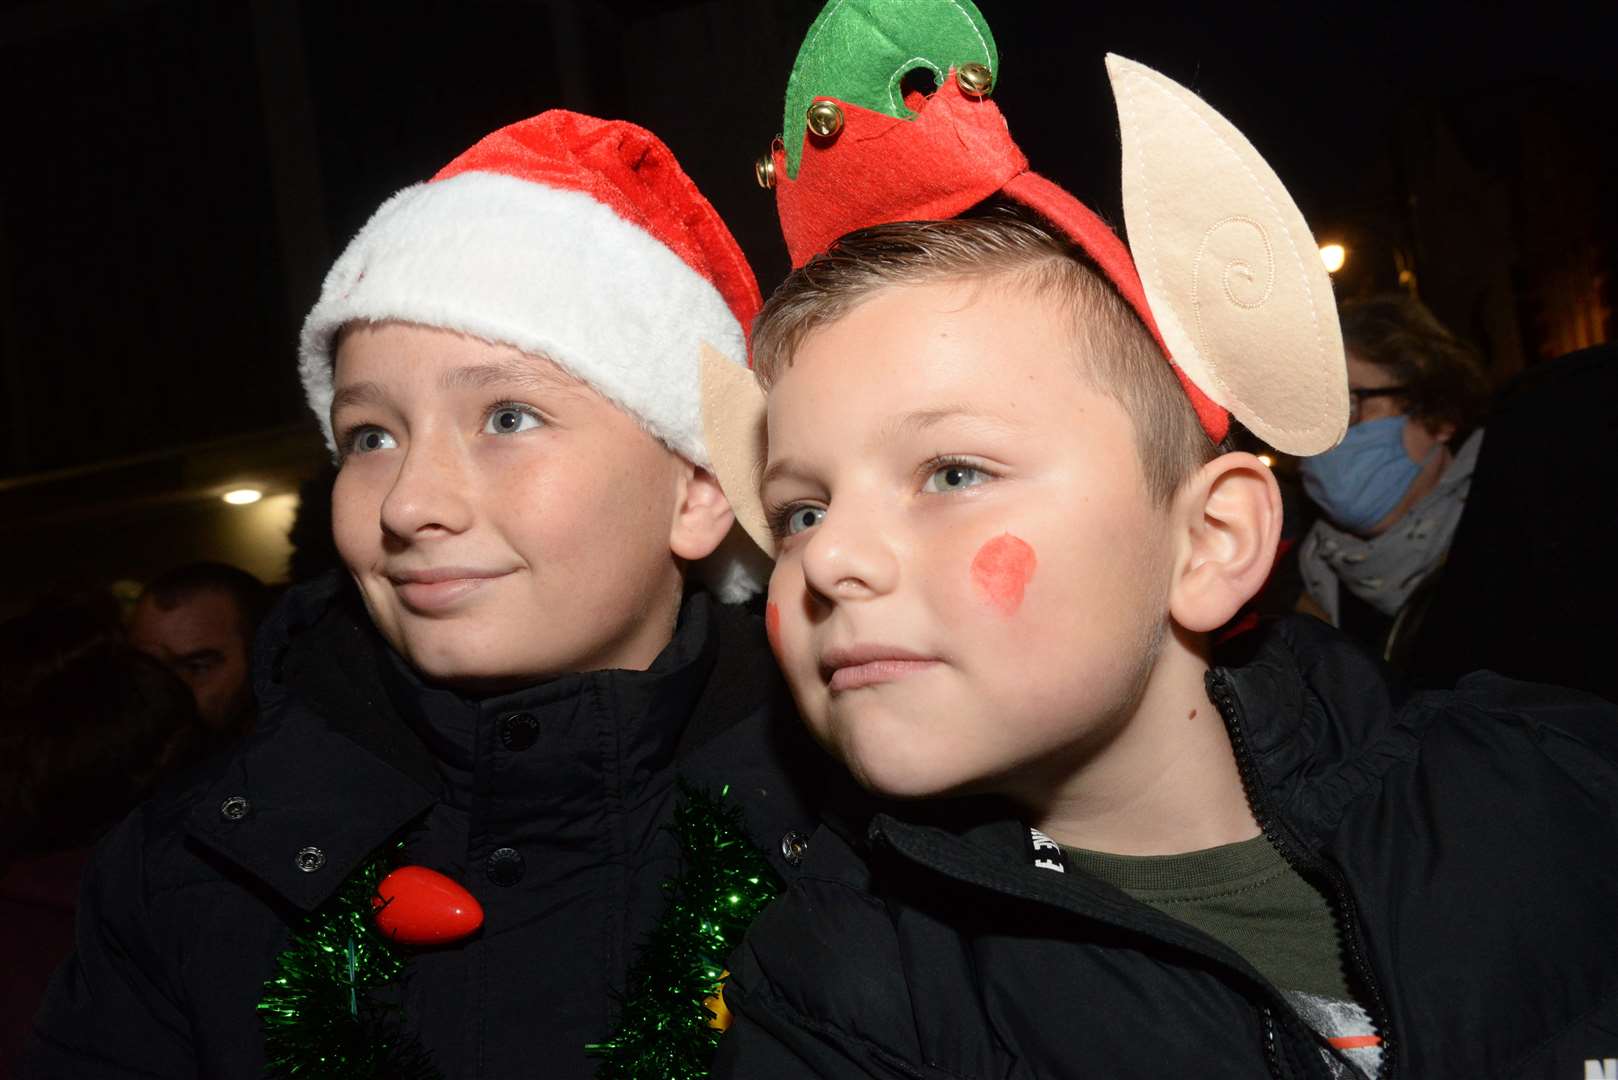 Charlie, 10 and Archie Dimmock, 11, at the Chatham Christmas lights switch-on. Picture: Chris Davey